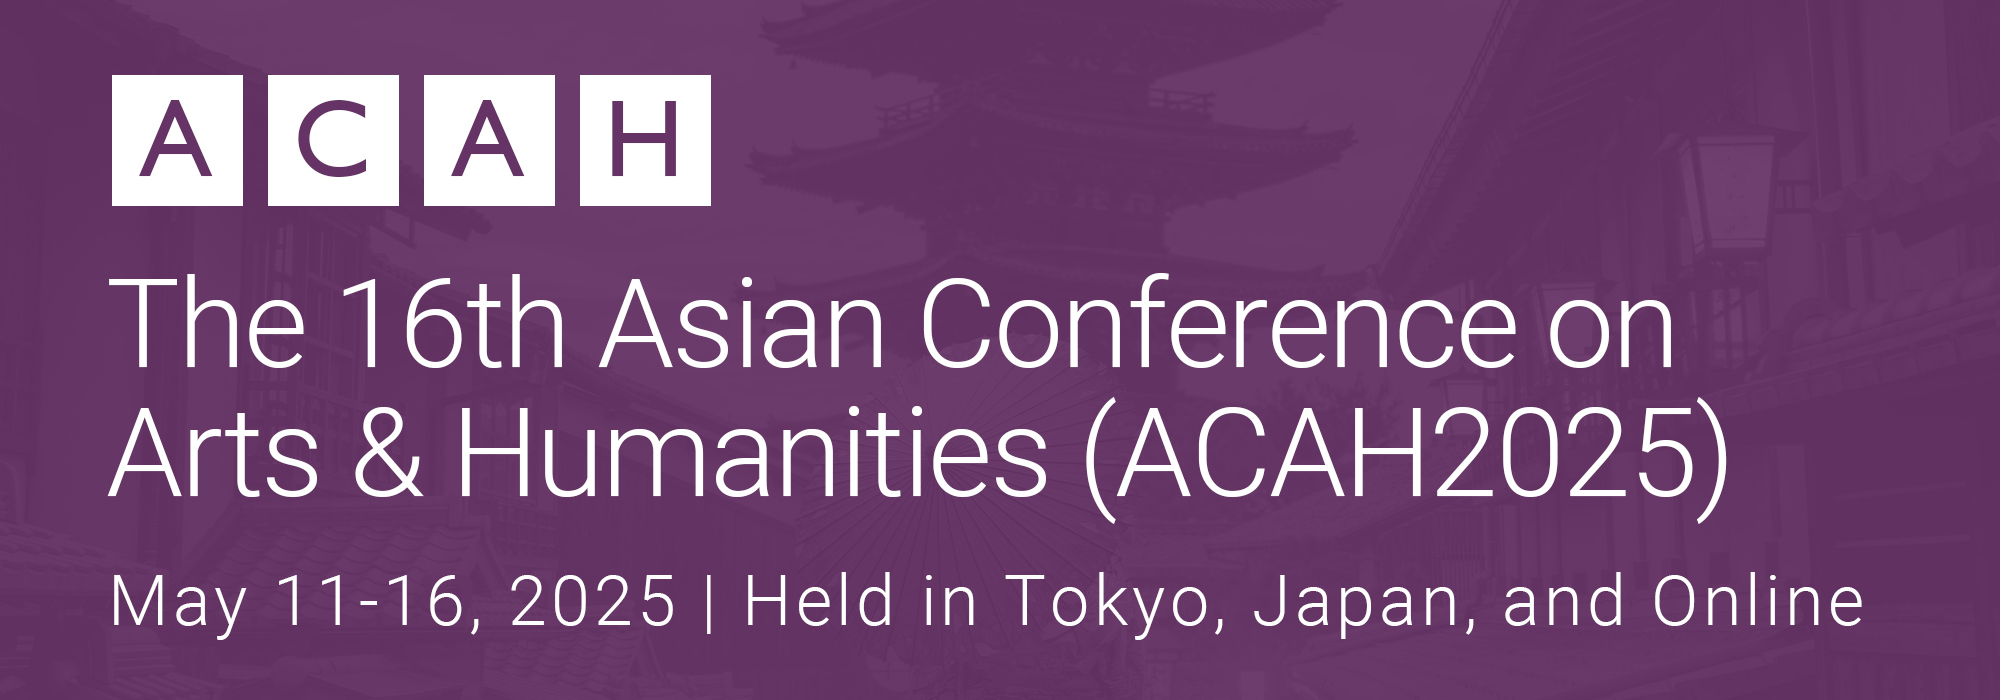 The Asian Conference on Arts & Humanities (ACAH)